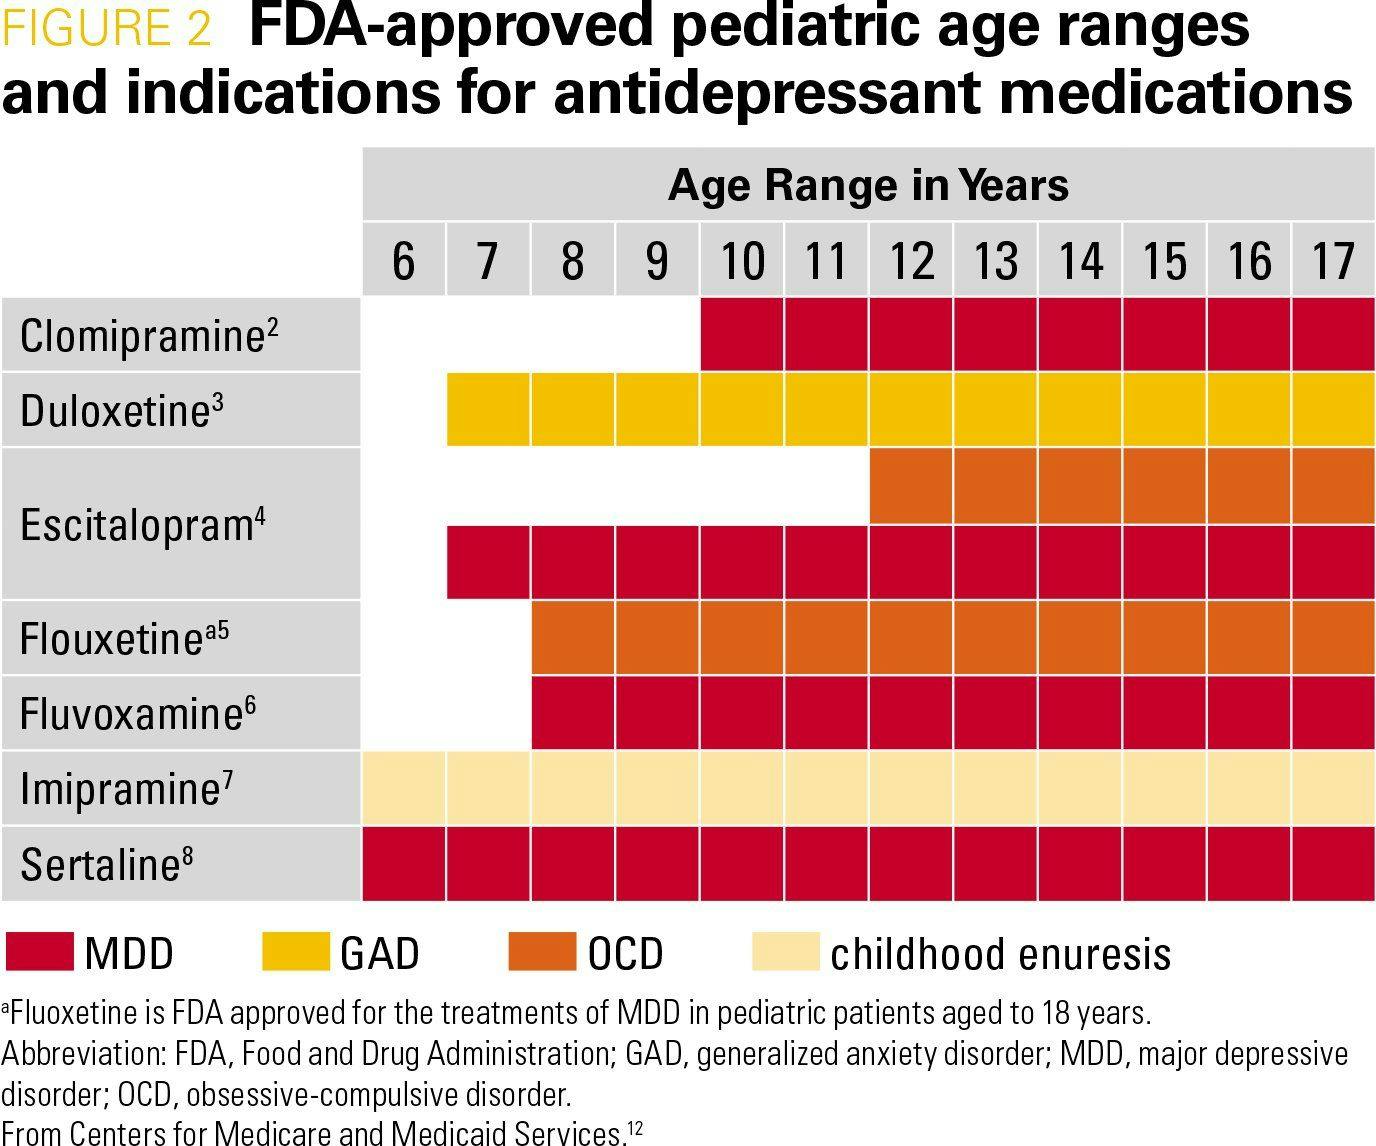 FDA-approved pediatric age ranges and indications for antidepressant medications